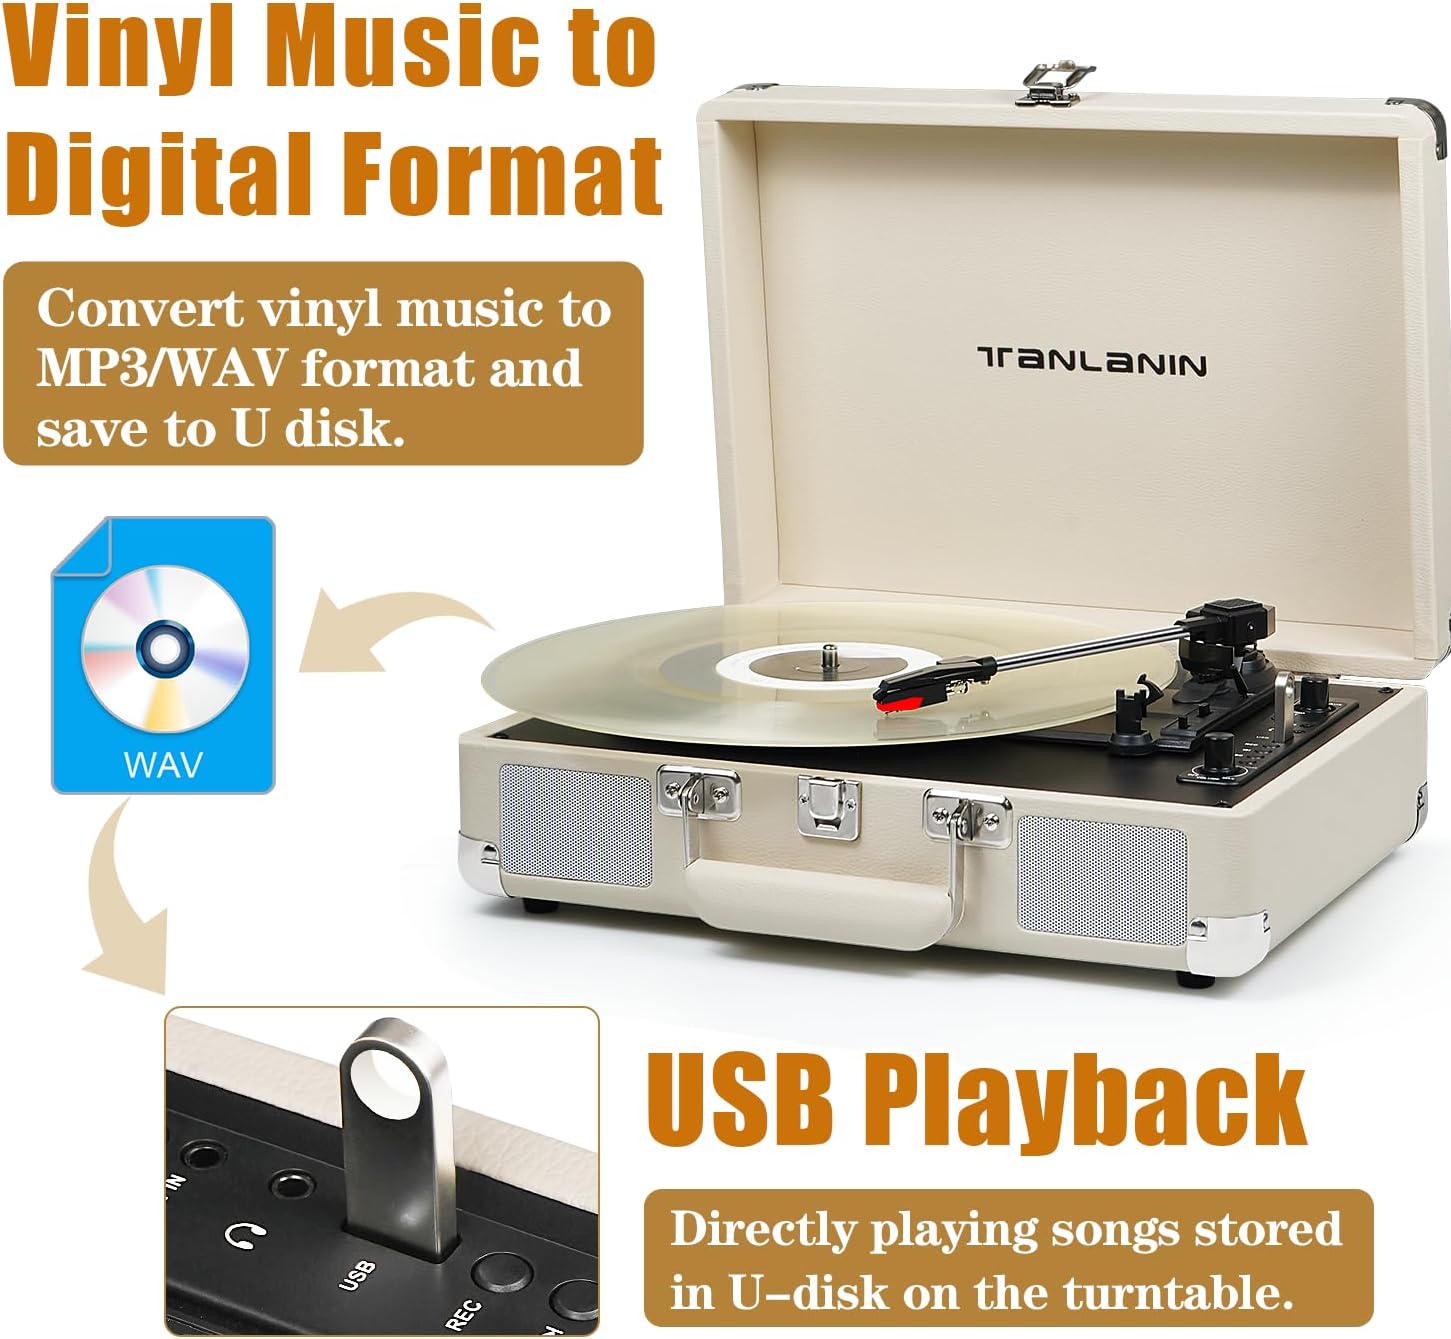 Vinyl Record Player Vintage Portable Suitcase Turntables with Built-in Upgrade Speakers, USB Recording, 33 45 78RPM Bluetooth LP Player Support AUX in RCA Line Out Headphone Jack, Cream White